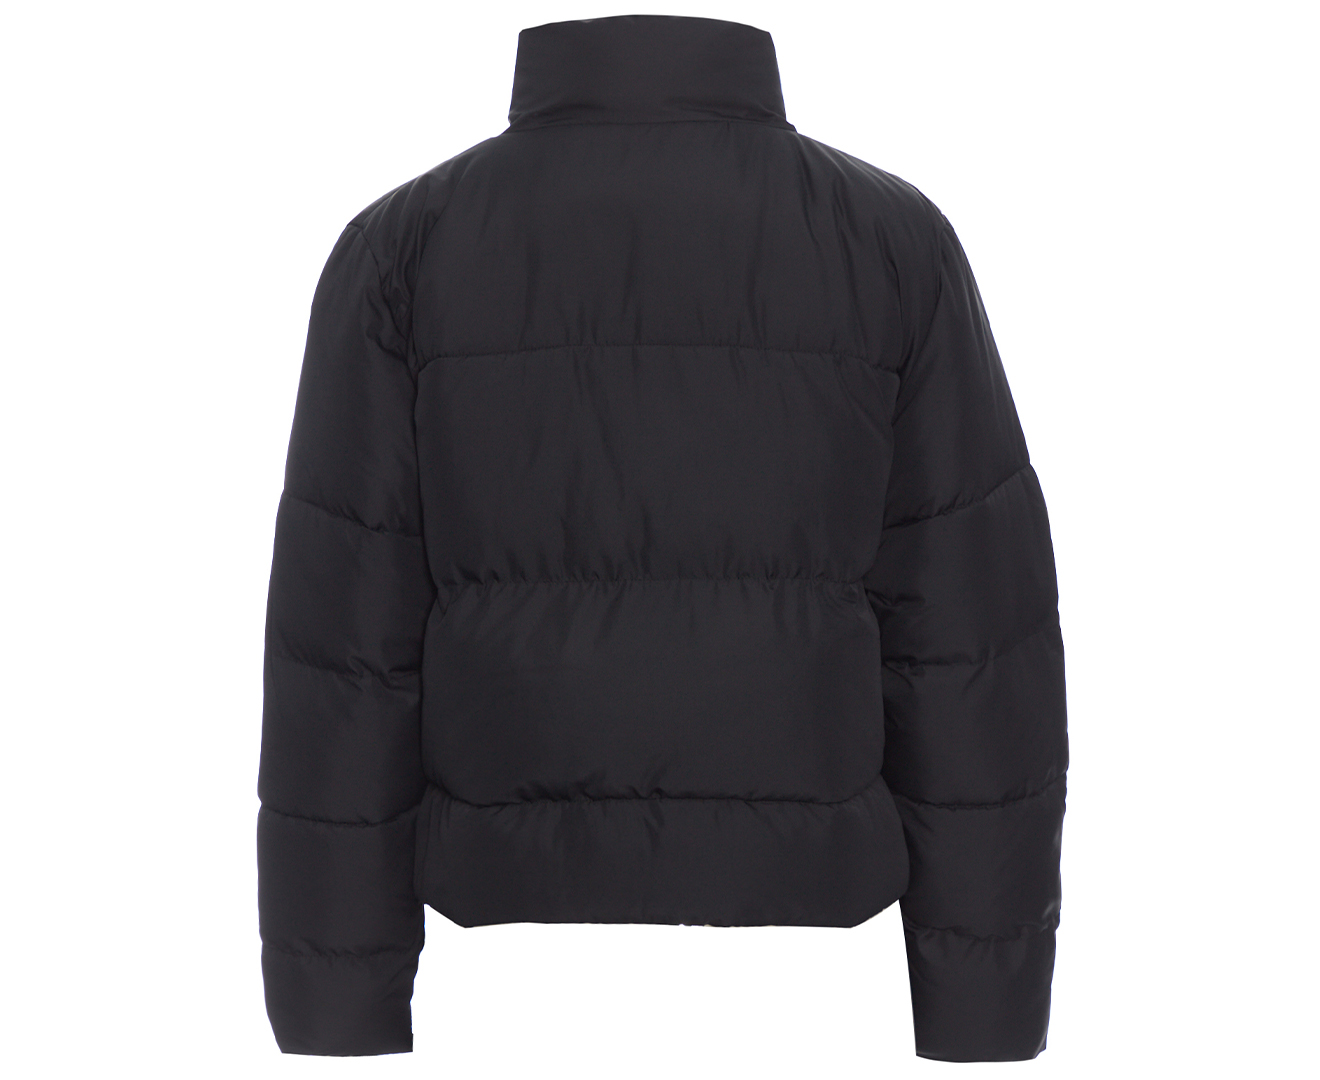 Russell Athletic Women's Mid Puffer Jacket - Black | Catch.com.au